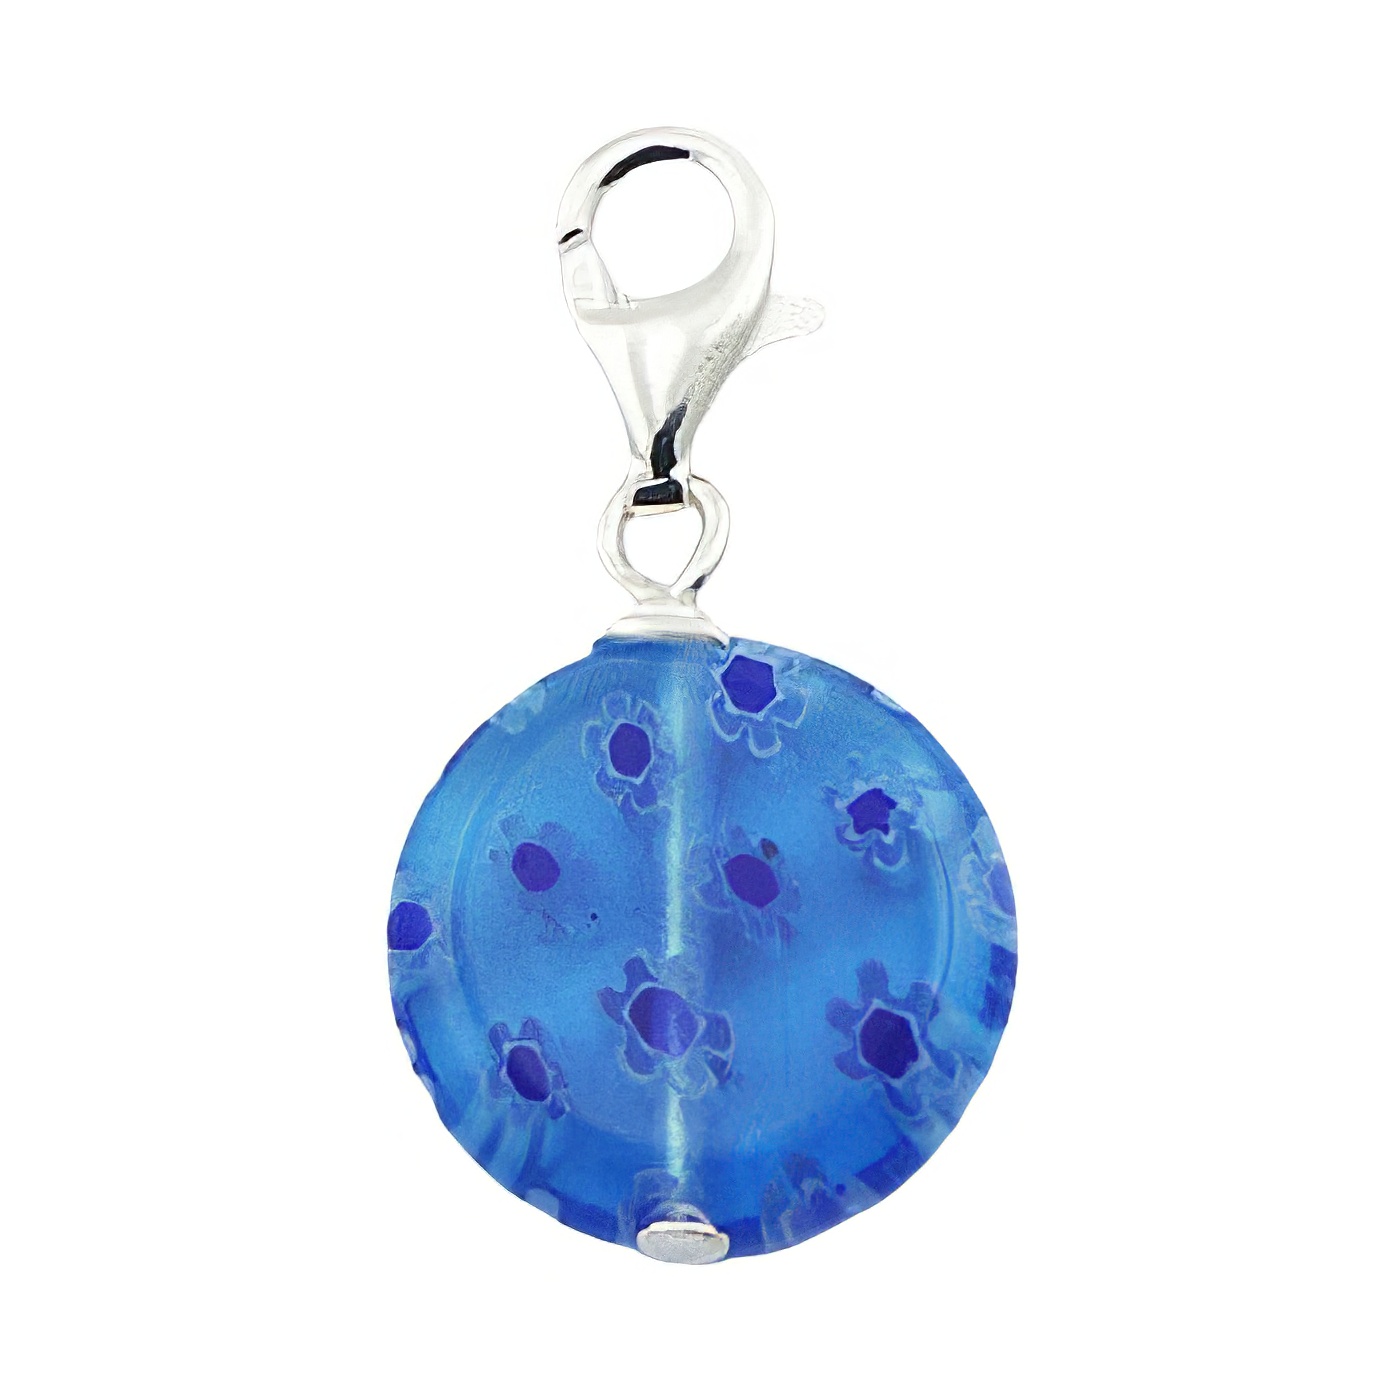 Murano glass disc flowers silver charm 